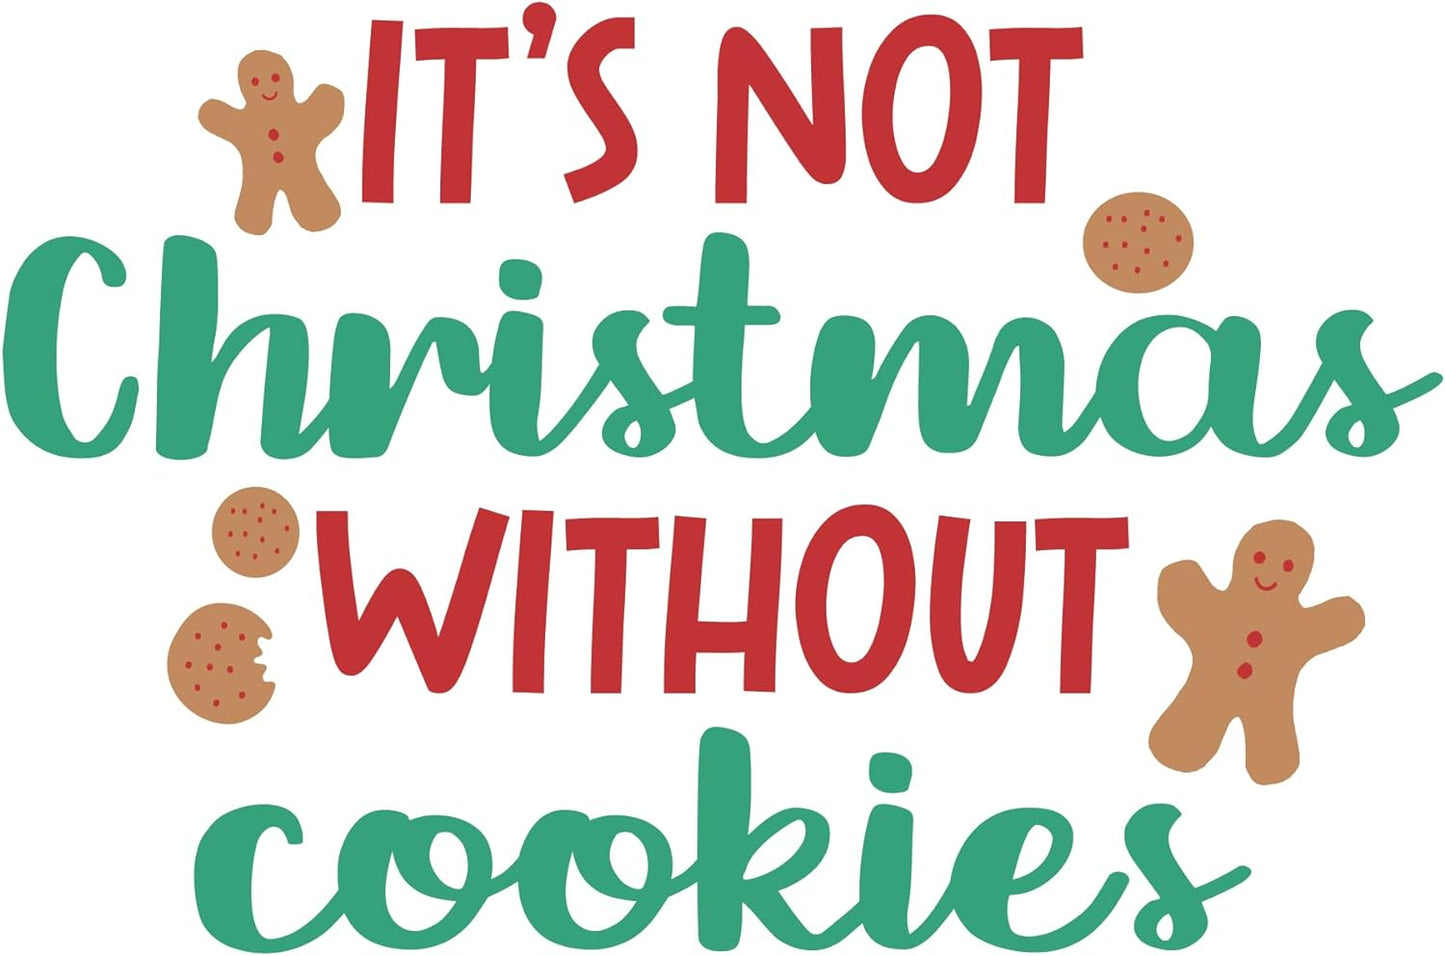 Inspirational Quote It's Christmas Without Cookies Motivational Sticker Vinyl Decal Motivation Stickers- 5" Vinyl Sticker Waterproof